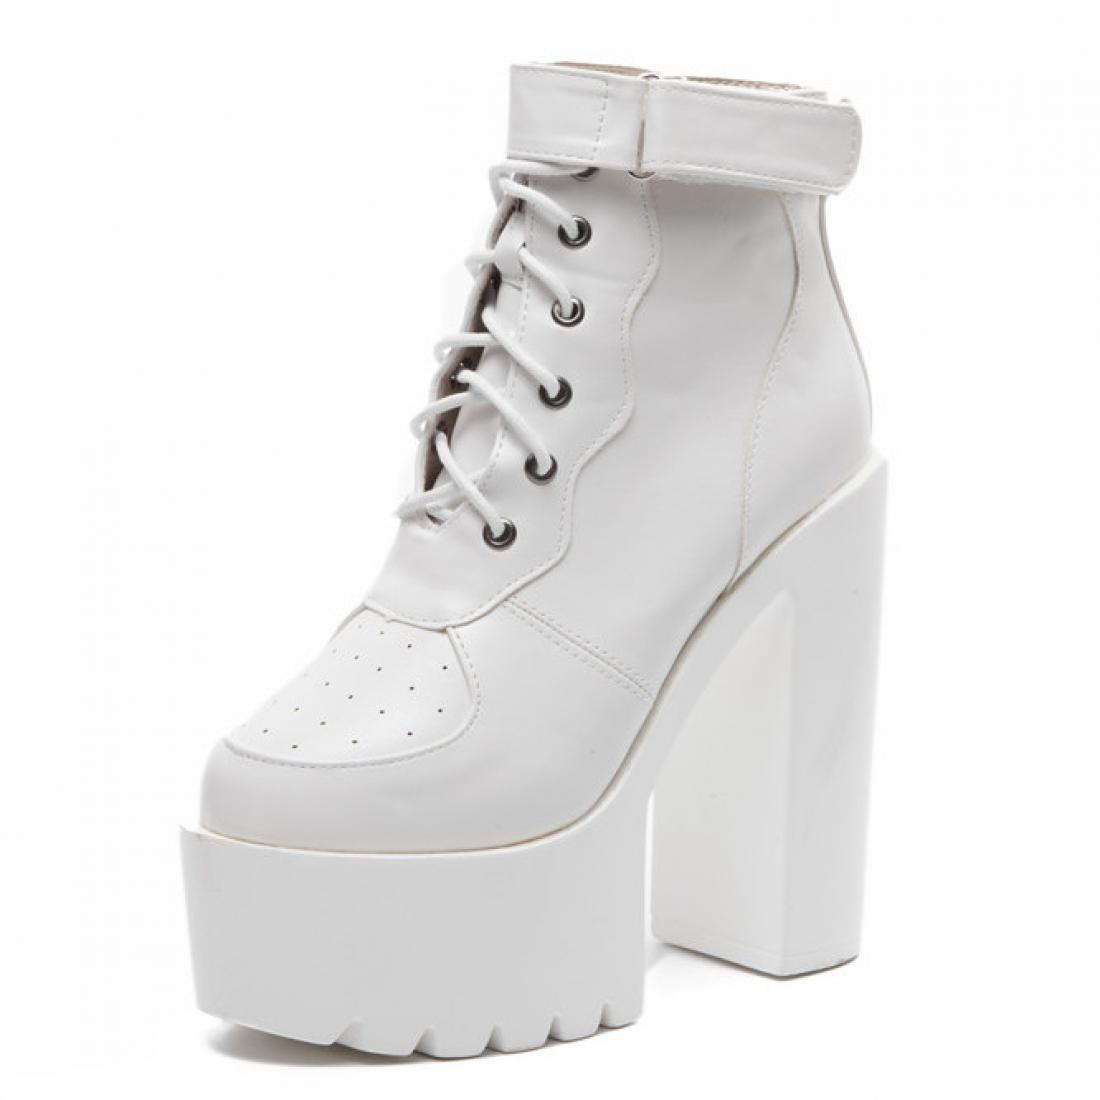 White Sneakers Chunky Block Sole High Heels Boots Shoes ...